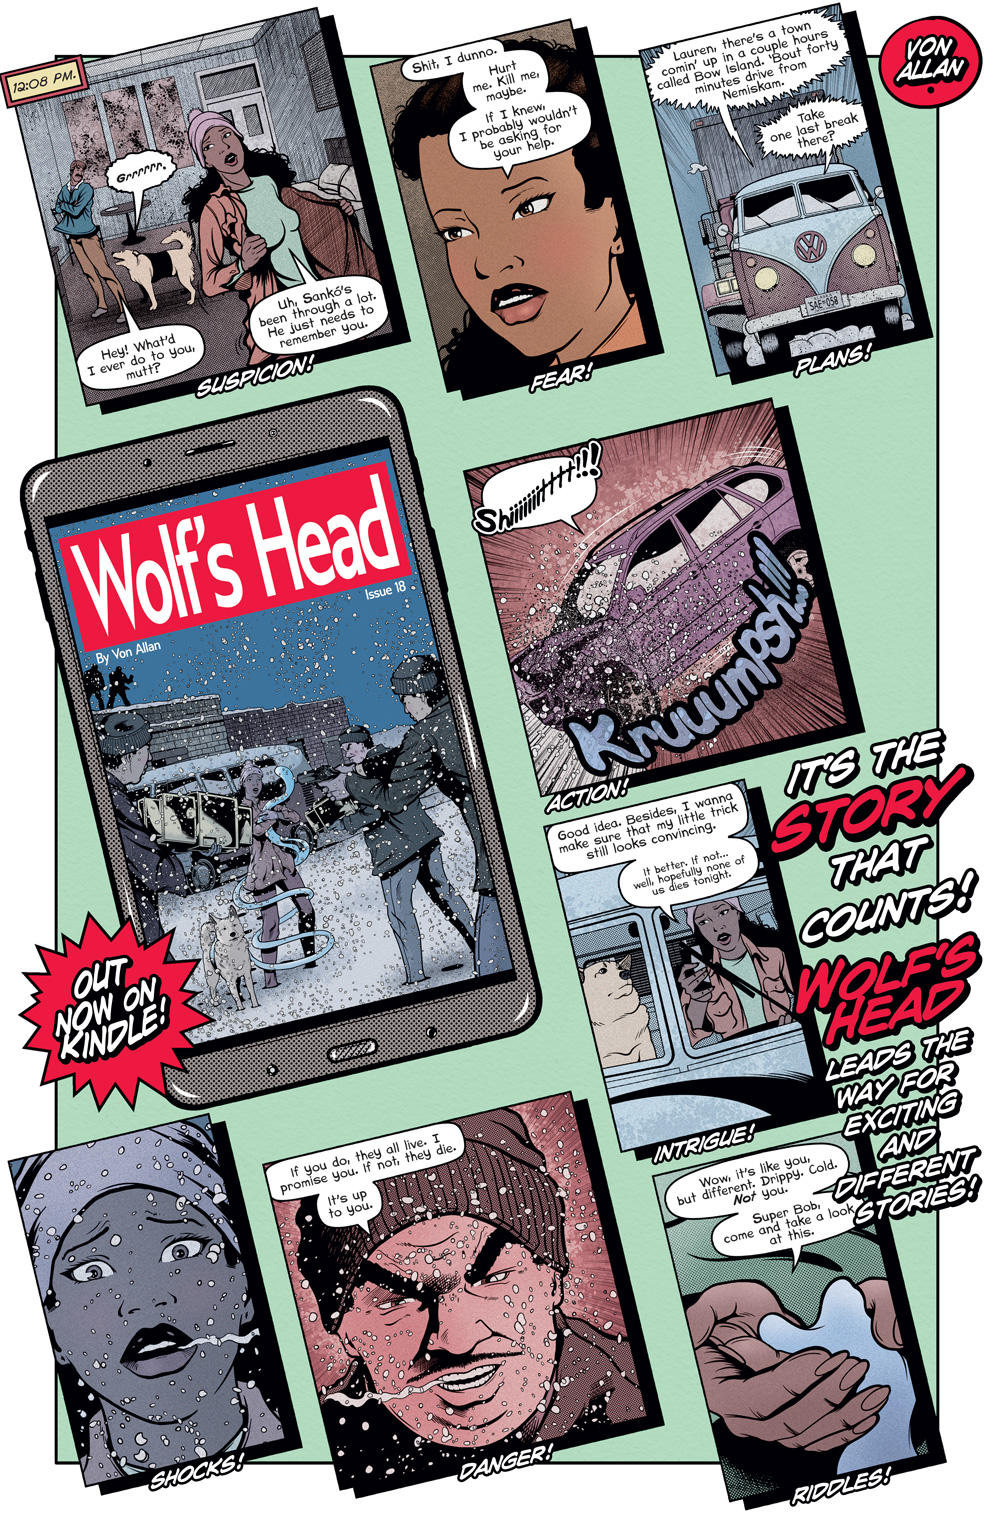 Panel examples from Wolf's Head 18